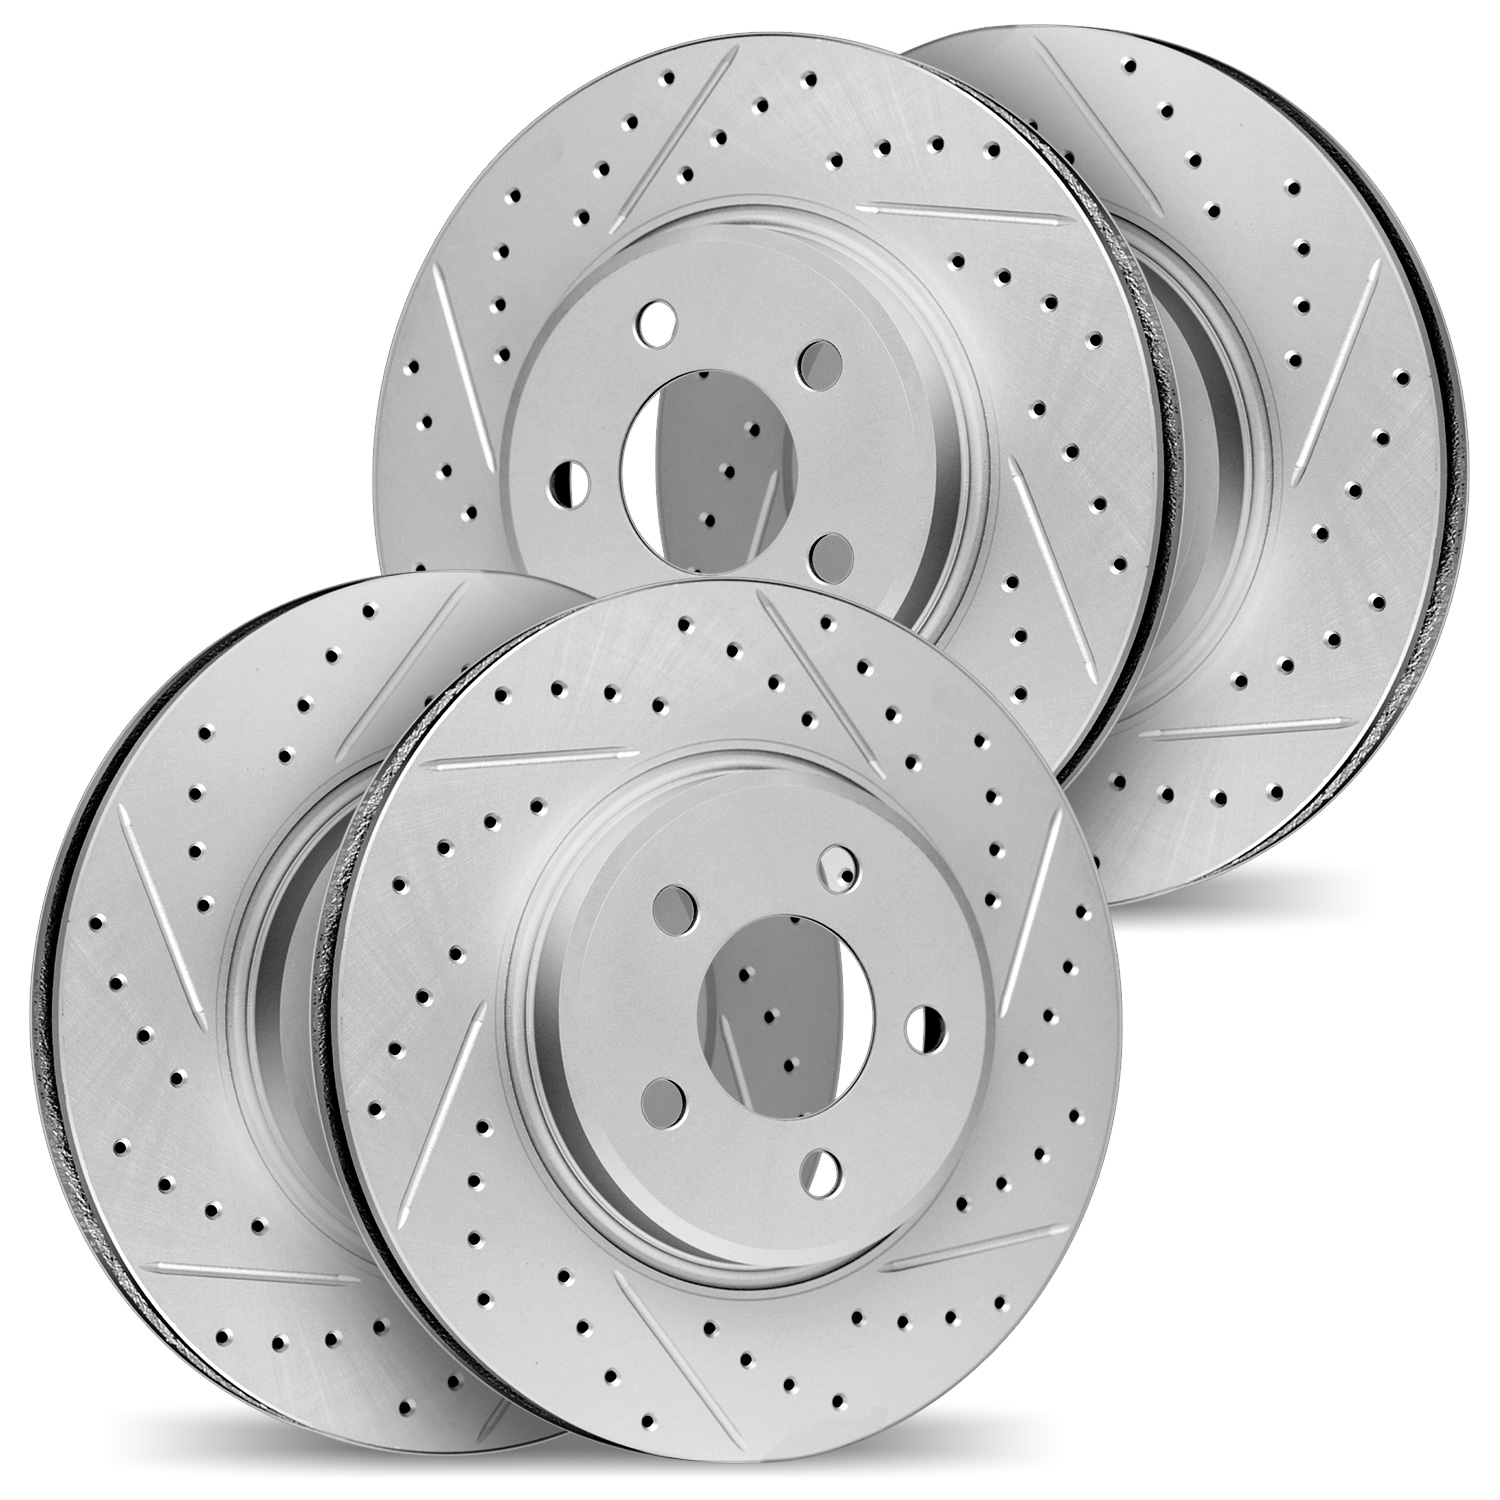 2004-54158 Geoperformance Drilled/Slotted Brake Rotors, Fits Select Ford/Lincoln/Mercury/Mazda, Position: Front and Rear